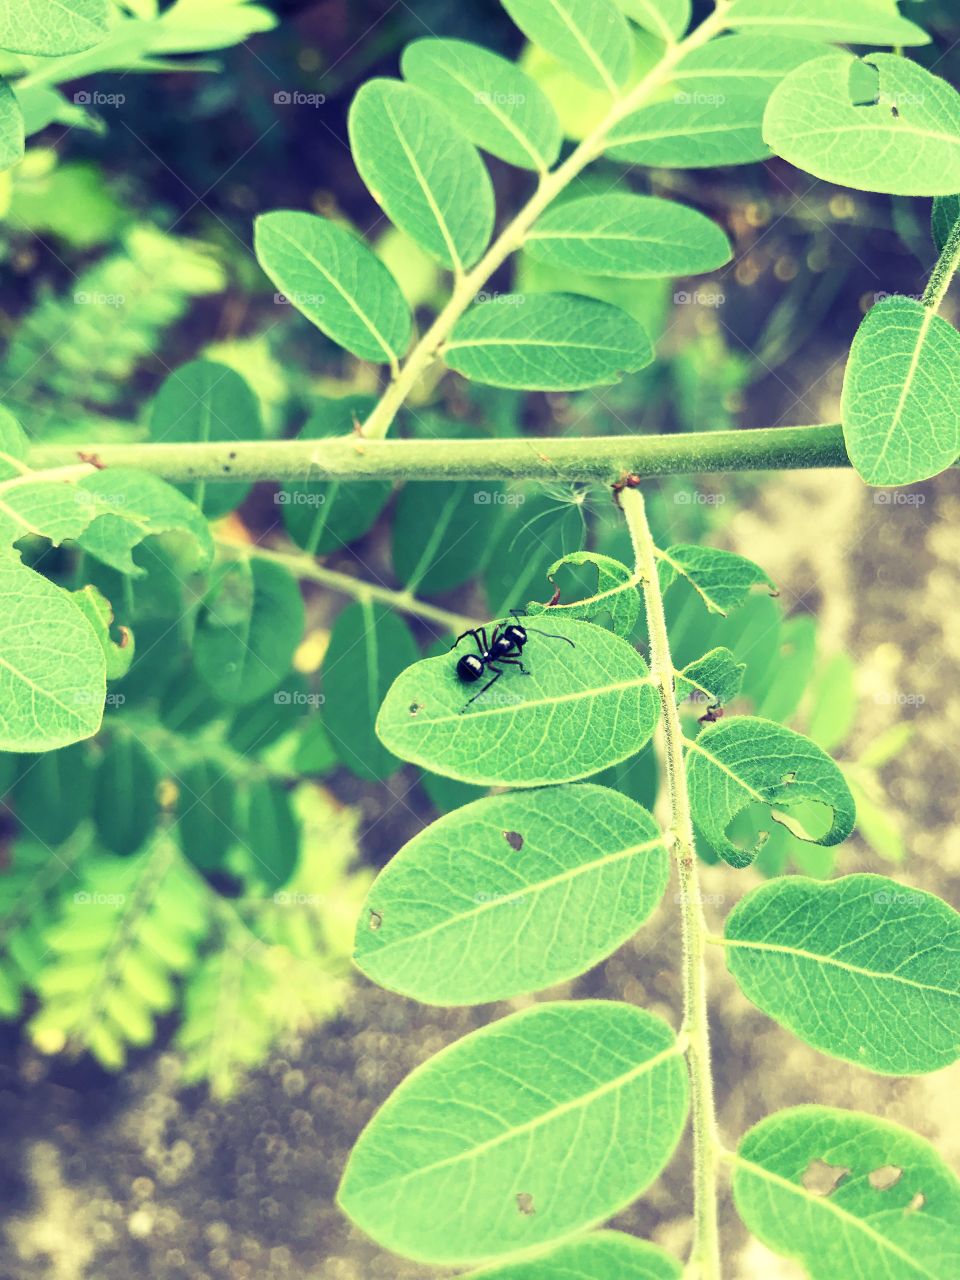 Black an ant among the leaves. Natural tracking 